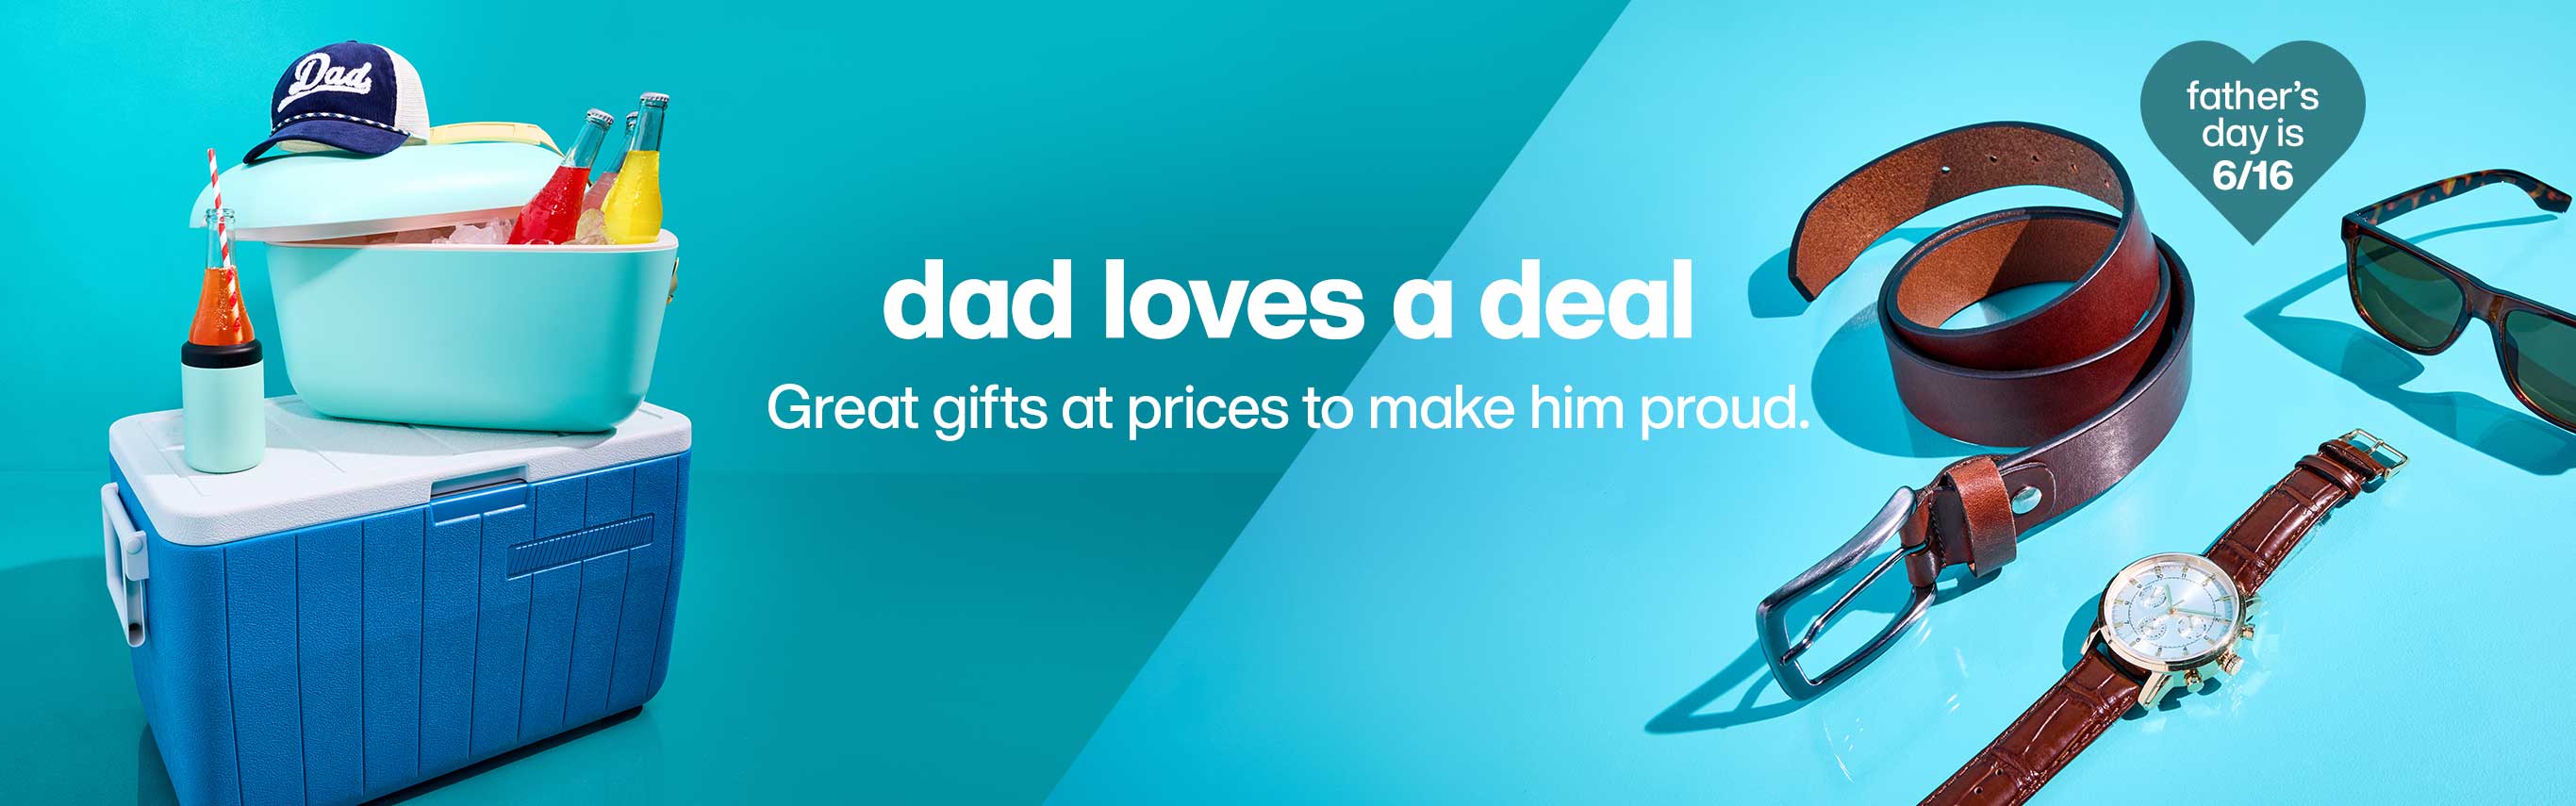 Dads love a deal. Great gifts at prices to make him proud. Shop Now.